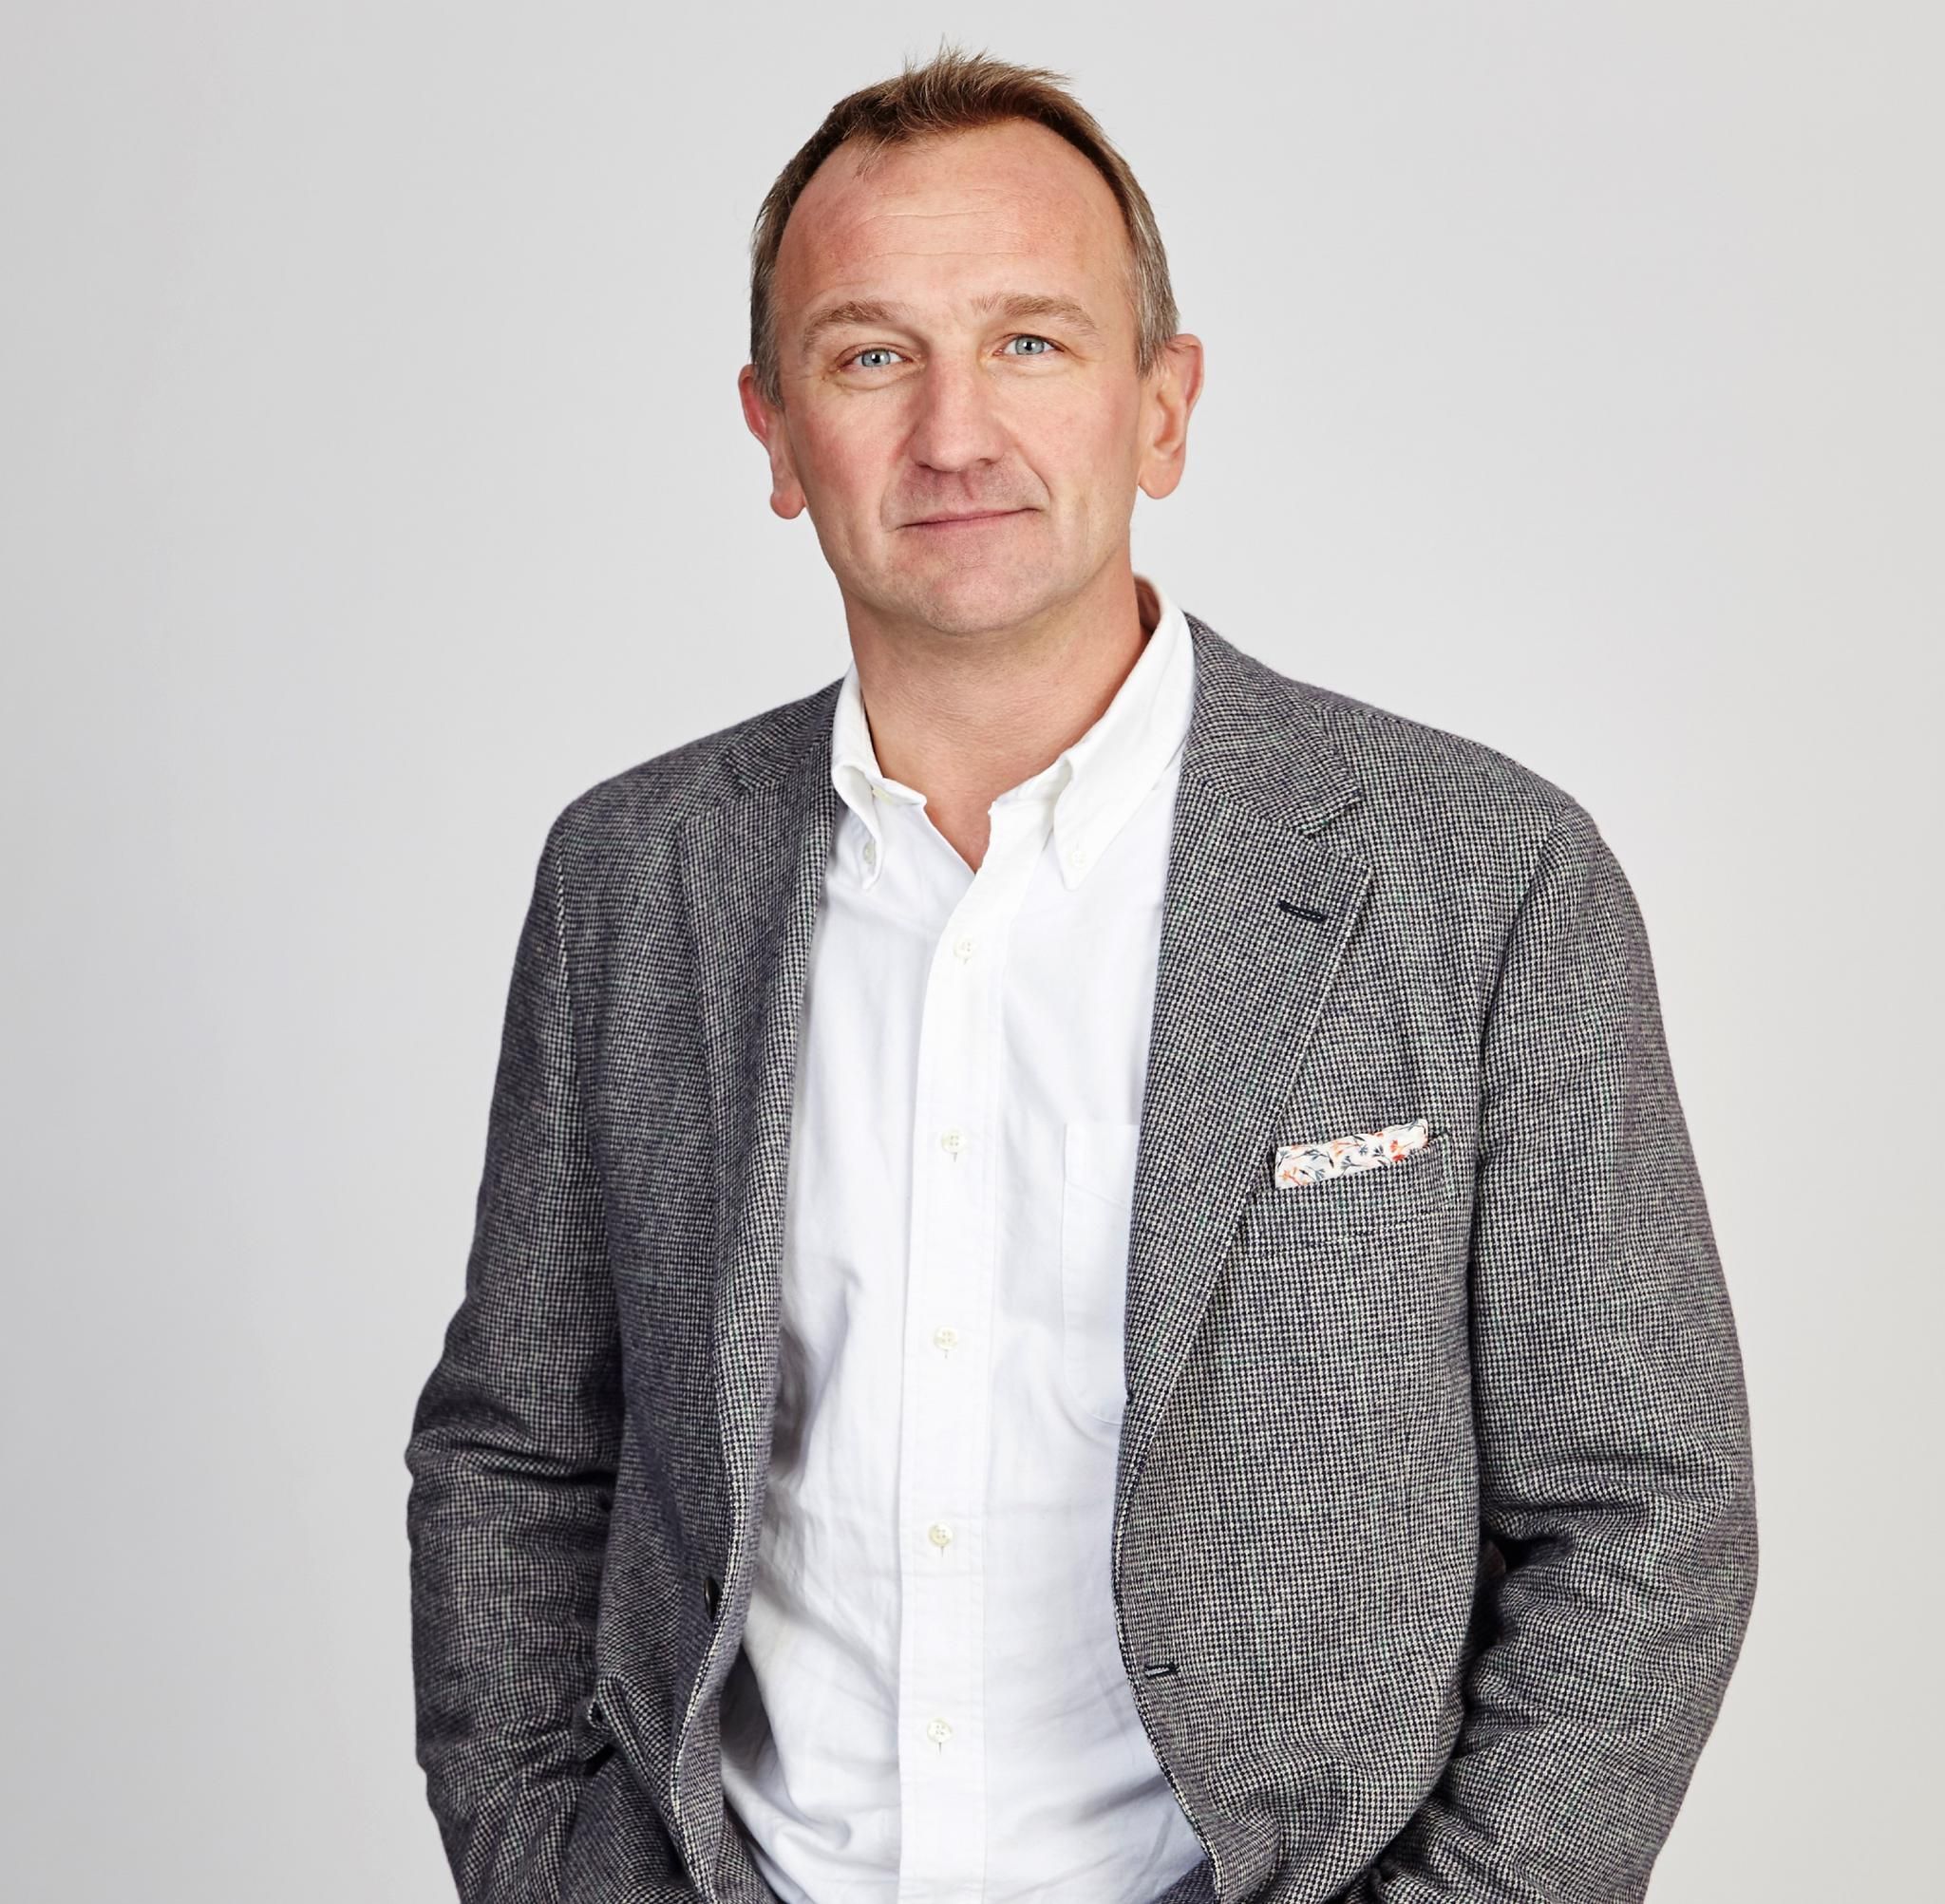 Laurent Kleitman has been appointed Chief Executive Officer at